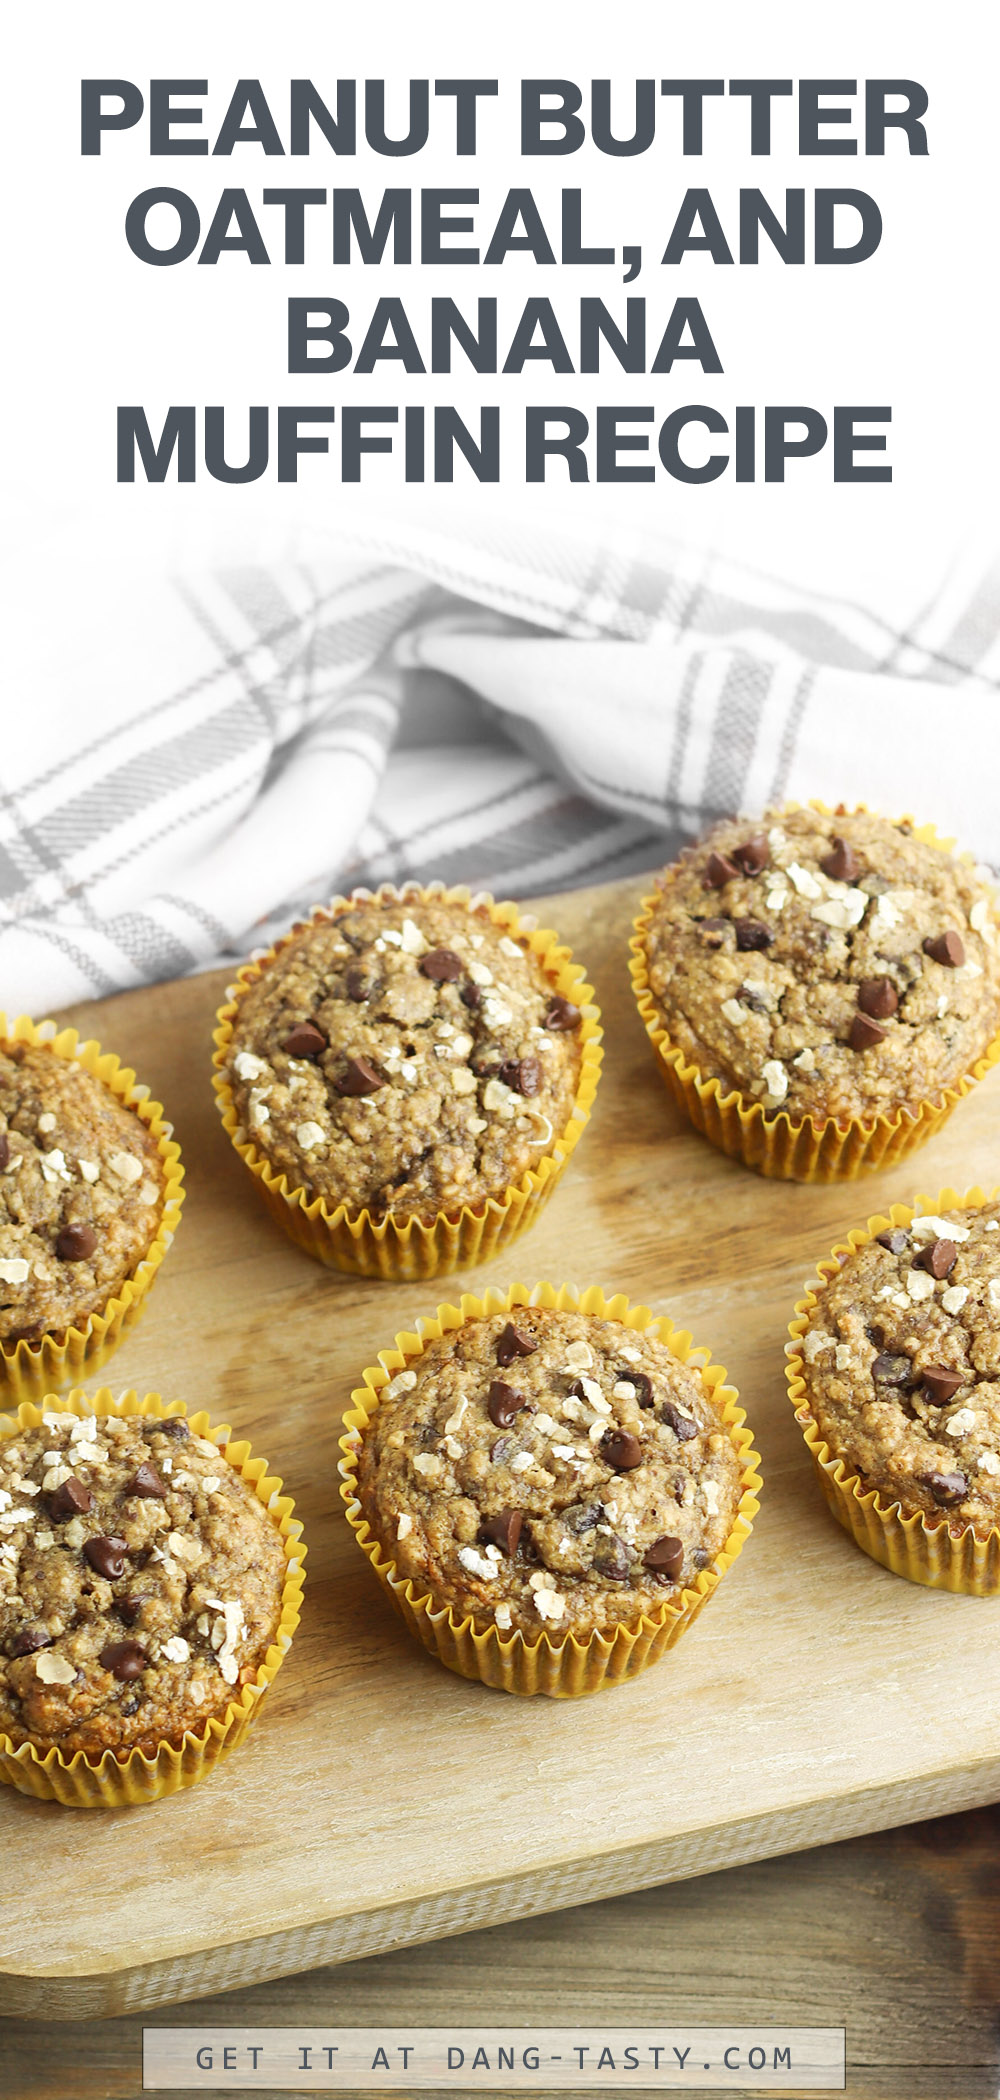 These peanut butter, oatmeal, and banana muffins will sate your sweet tooth without added sugar. Perfect for breakfast or a quick snack, these muffins are heaven served warm with a dollop of peanut butter on top.